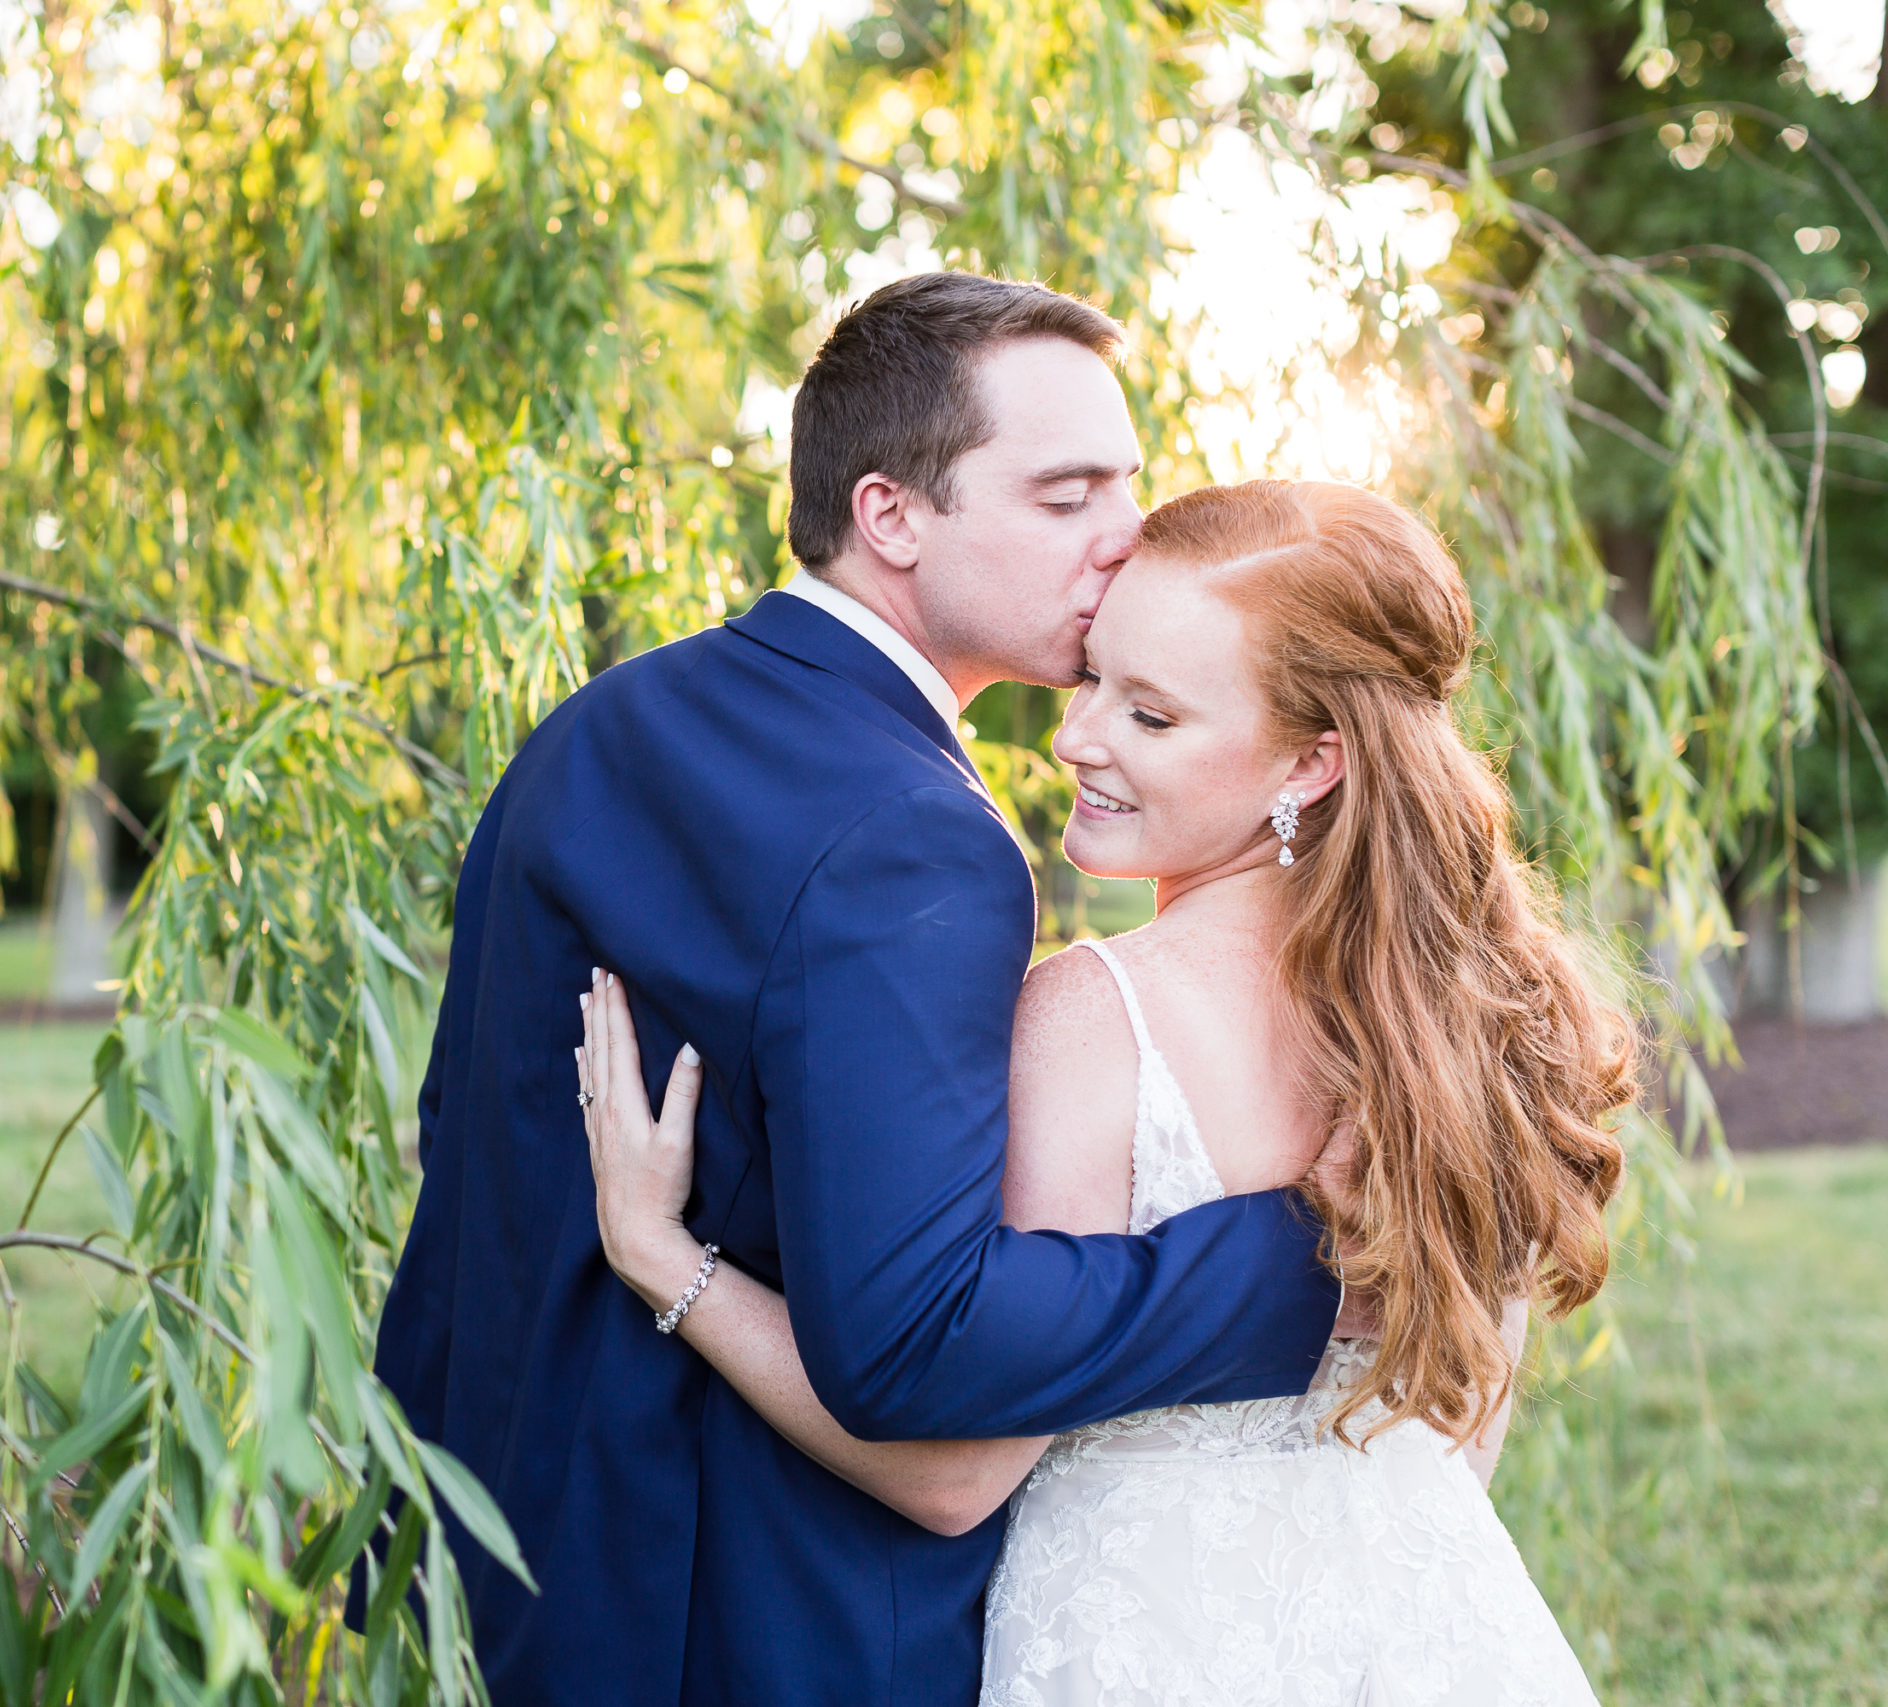 Husband and wife embrace at sunset during stress free wedding day